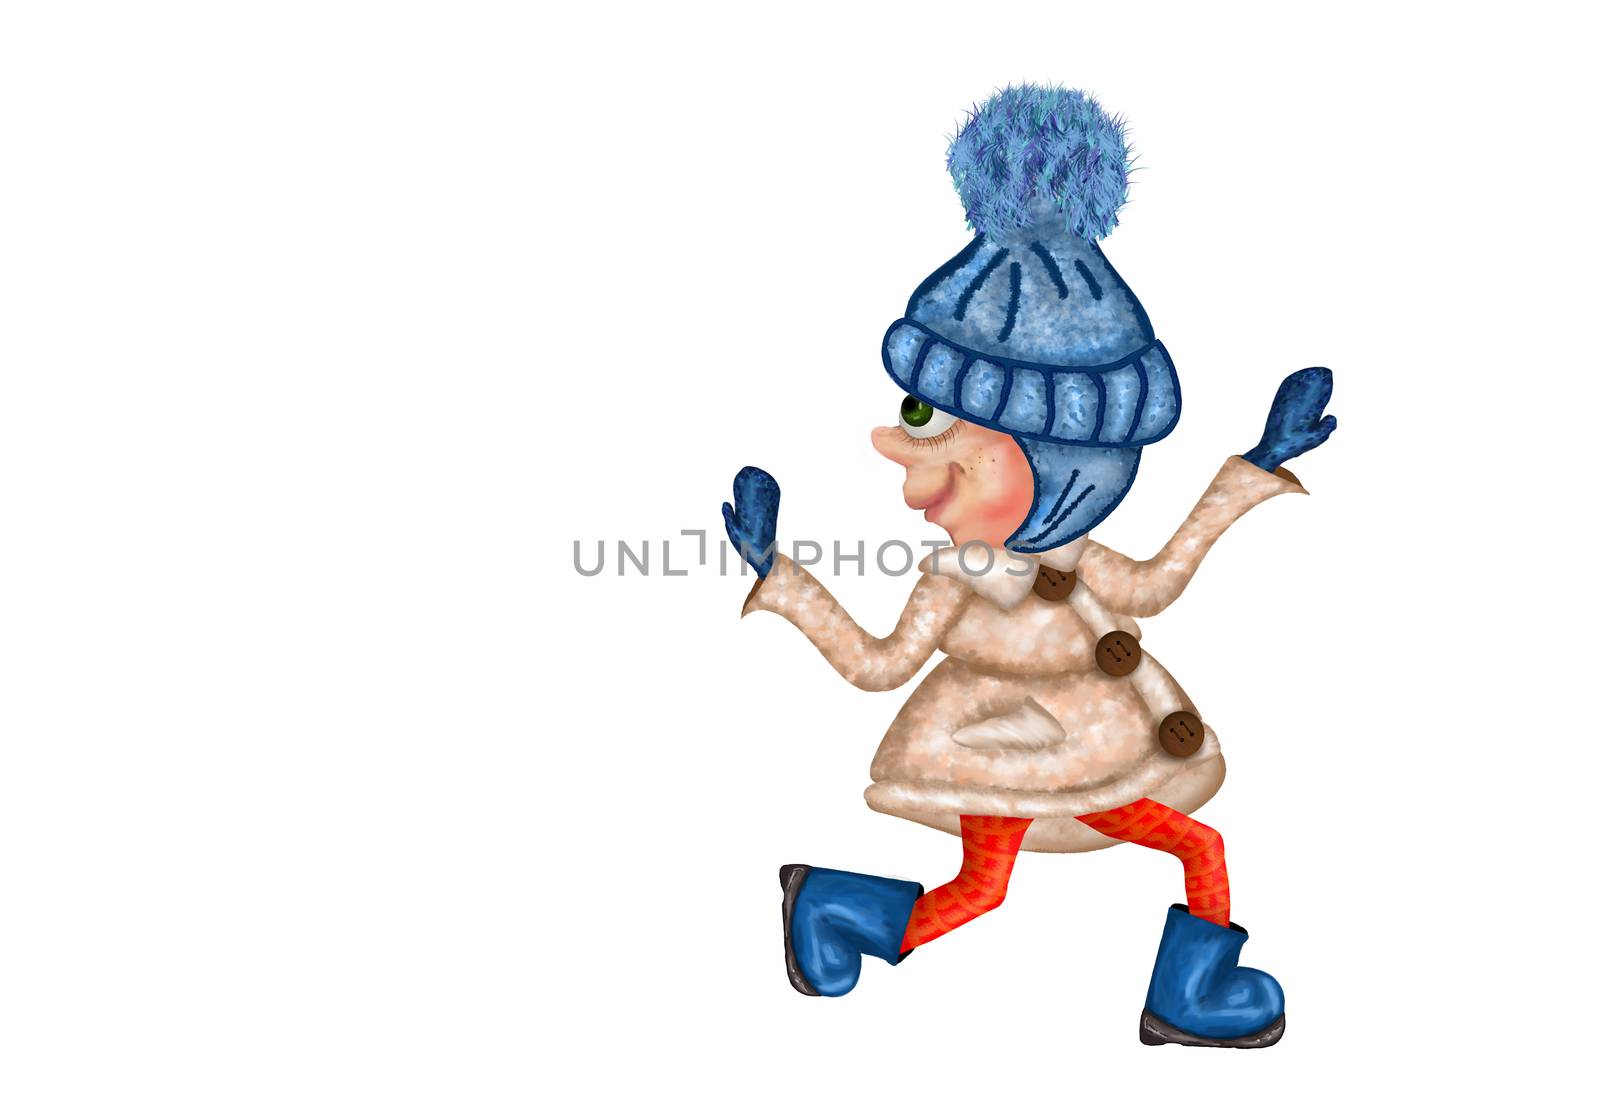 Cute little girl waving in warm hat, mitten, coat and shoes. Winter season time outdoors. Happy Christmas and New year. Cold Day Outside. Stock illustration